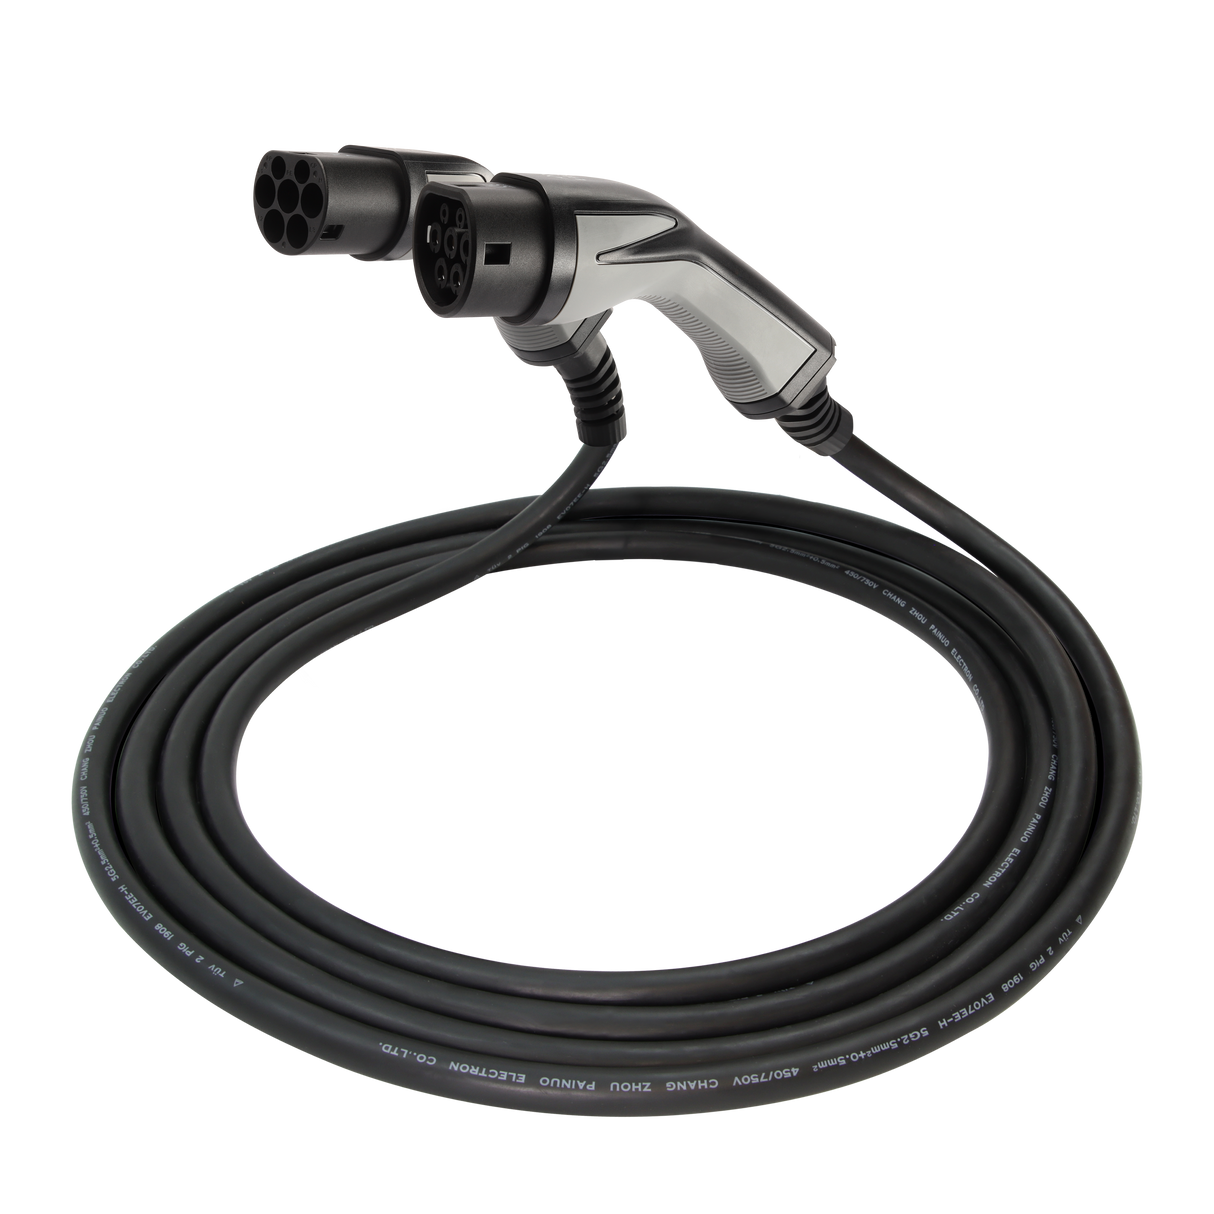 Charging cable Volkswagen Touareg - Erock Pro Type 2 - 16A 3 phase (11 kW)